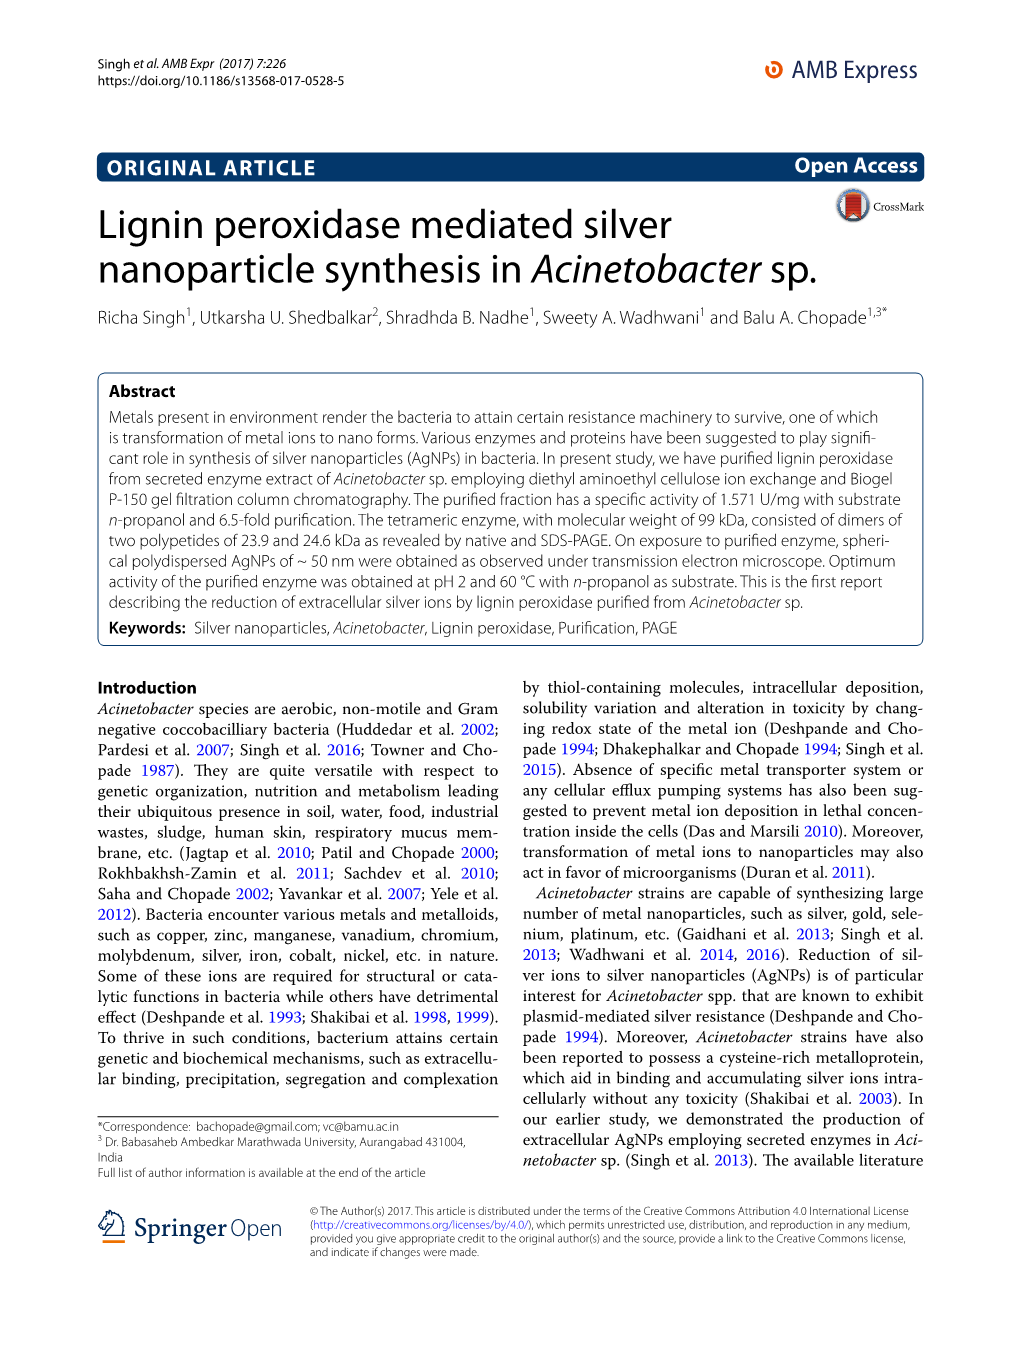 Lignin Peroxidase Mediated Silver Nanoparticle Synthesis in Acinetobacter Sp